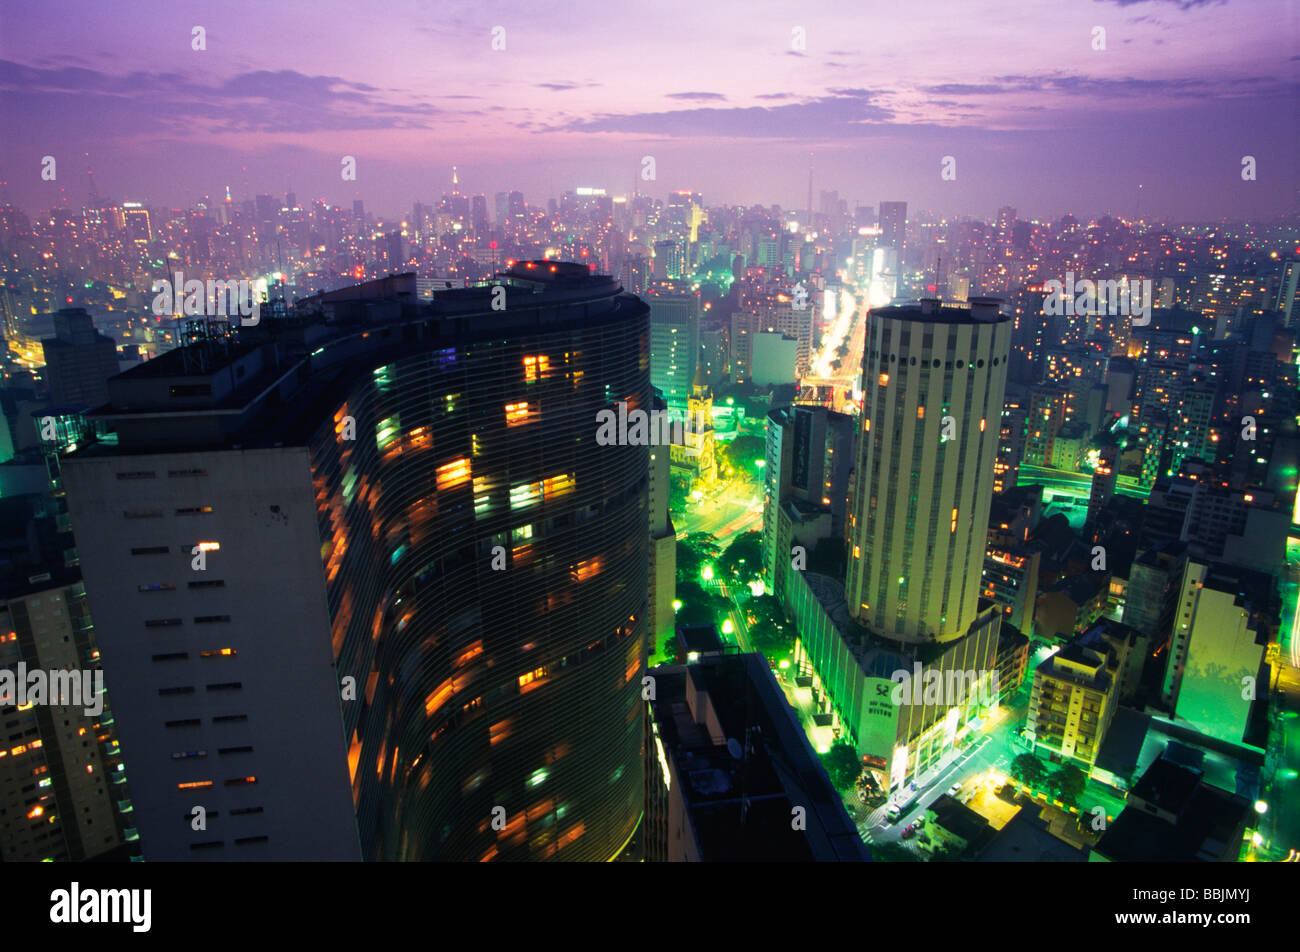 Overview of the city of Sao Paulo in the evening, Sao Paulo, Brasil Stock Photo